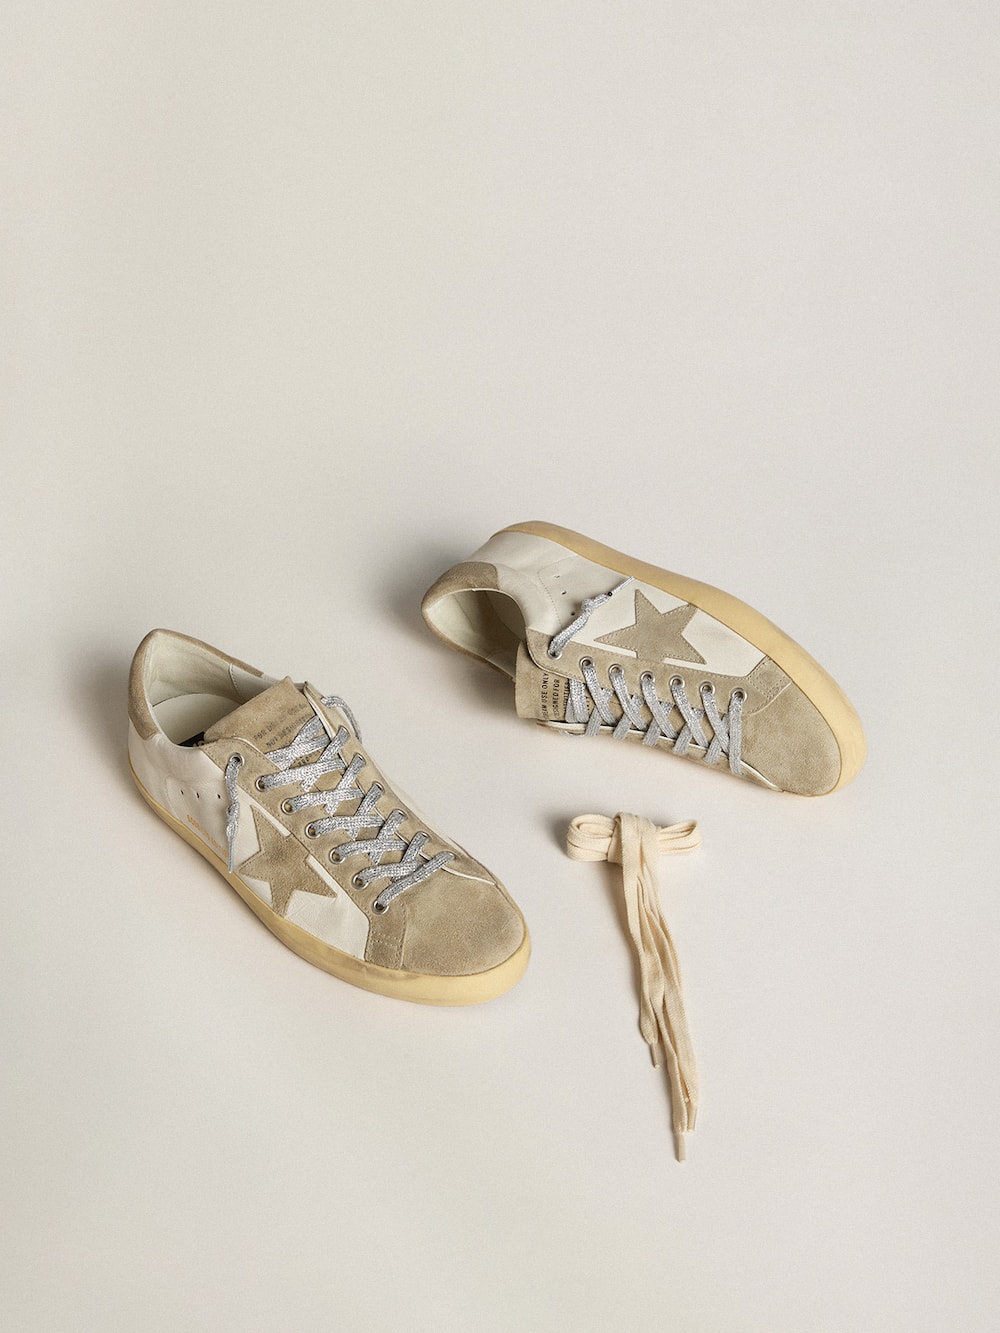 Golden Goose - Men’s Super-Star in nappa with ice-gray suede star and black embroidery in 